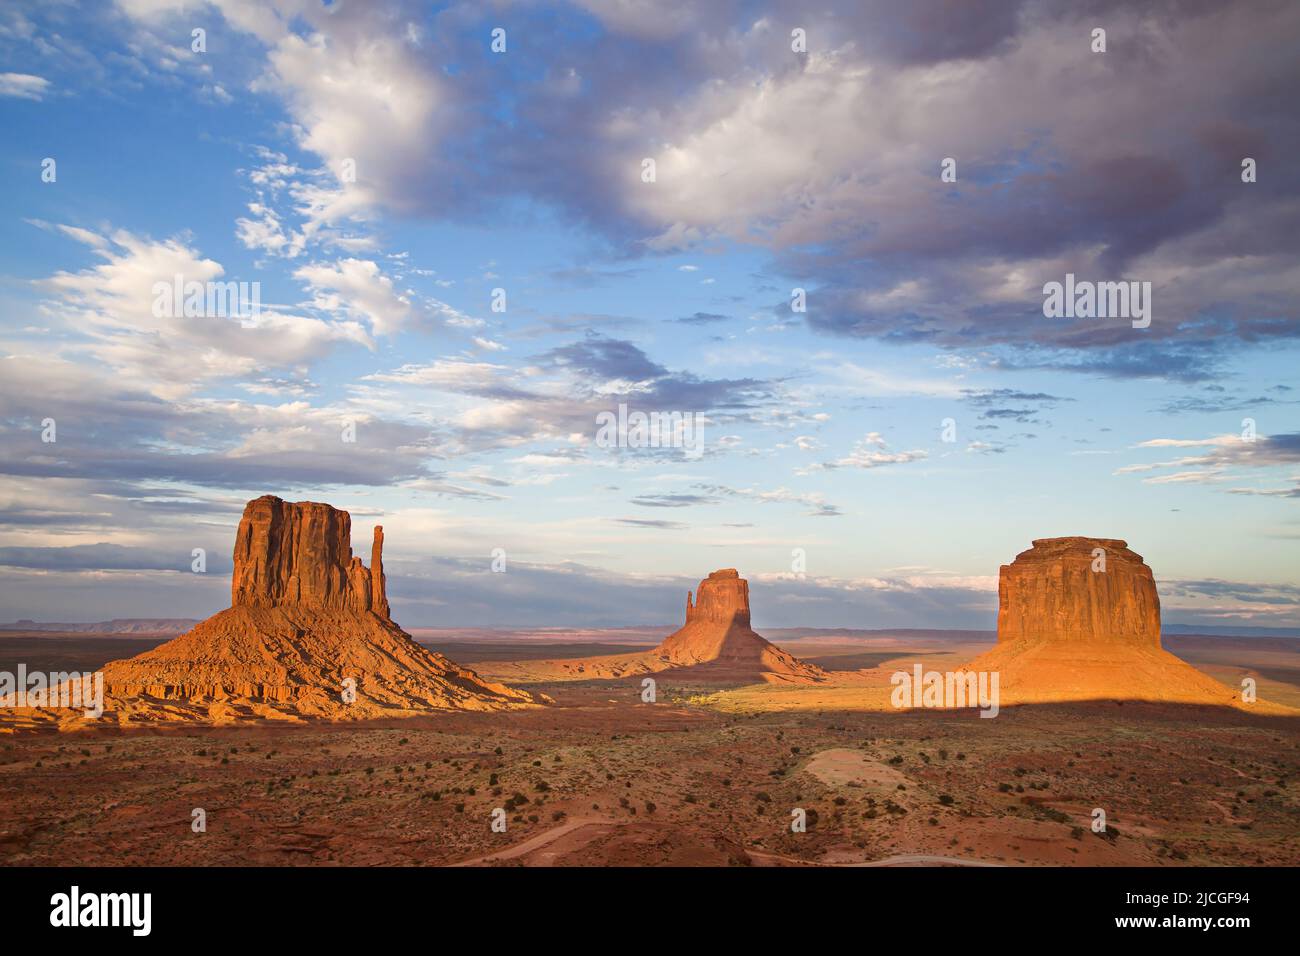 View from Lookout Point at dusk, Monument Valley, Arizona, United States. Stock Photo